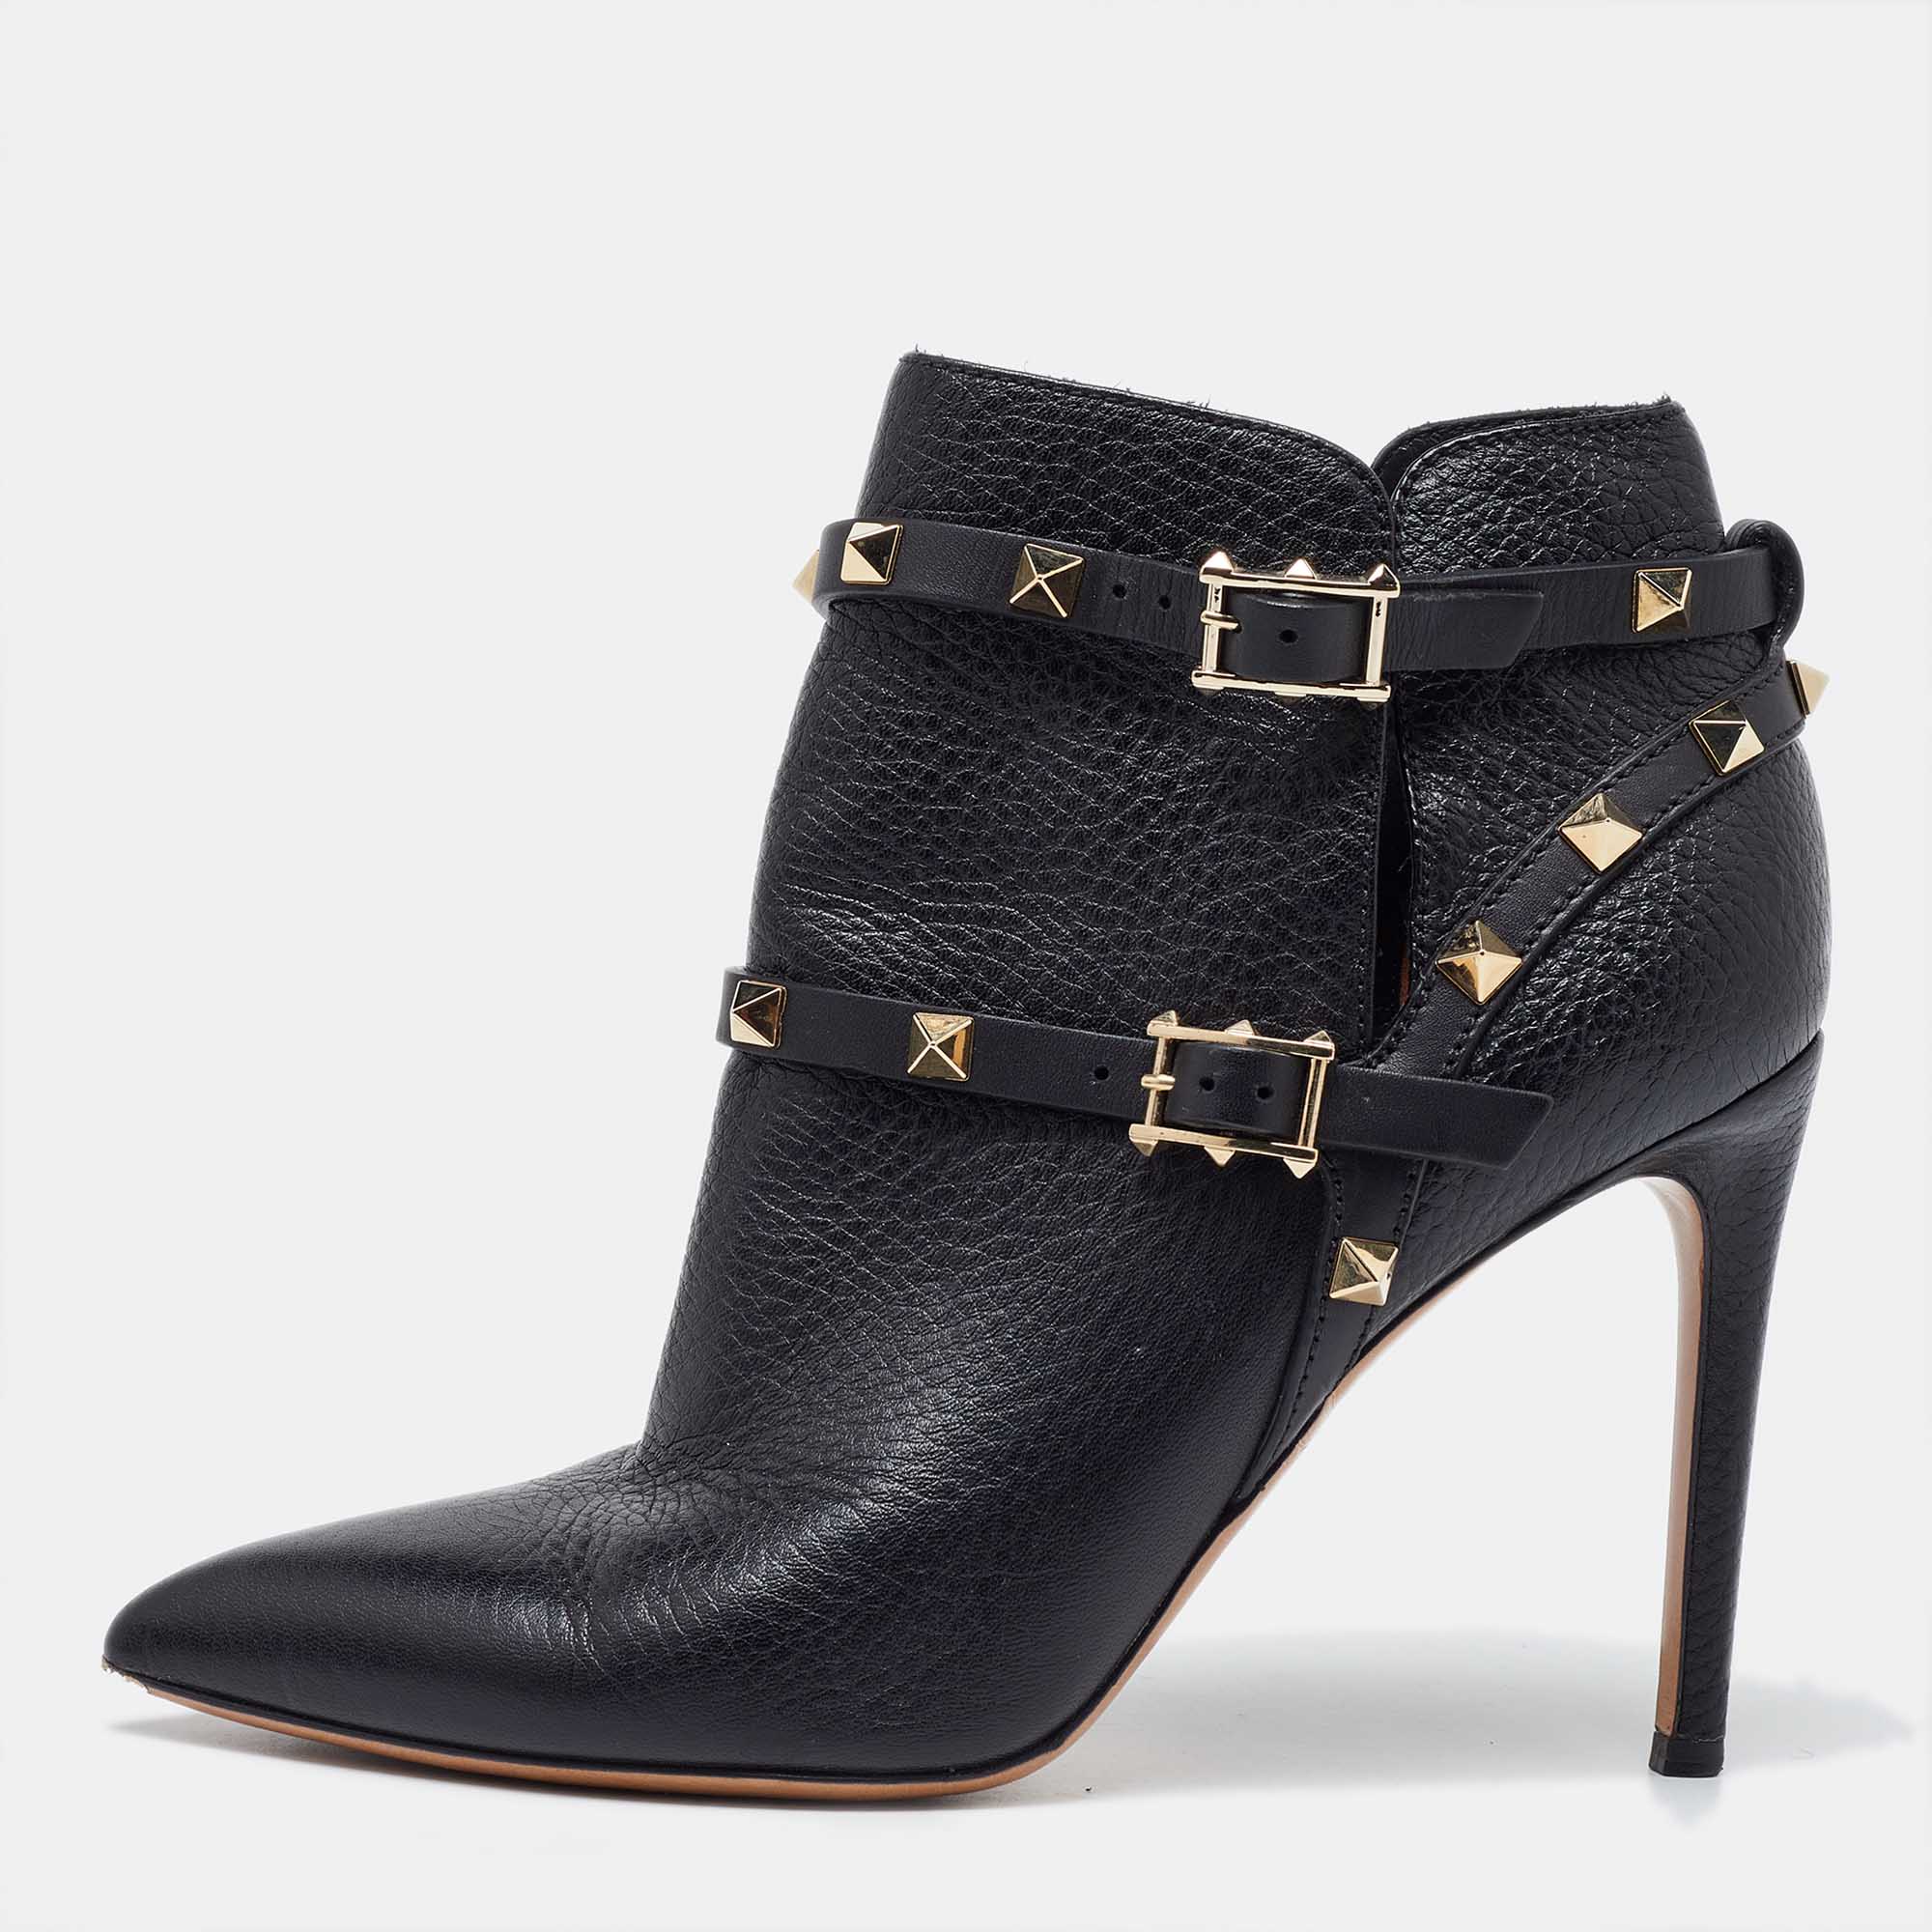 Valentino black leather rockstud pointed toe ankle boots size 37